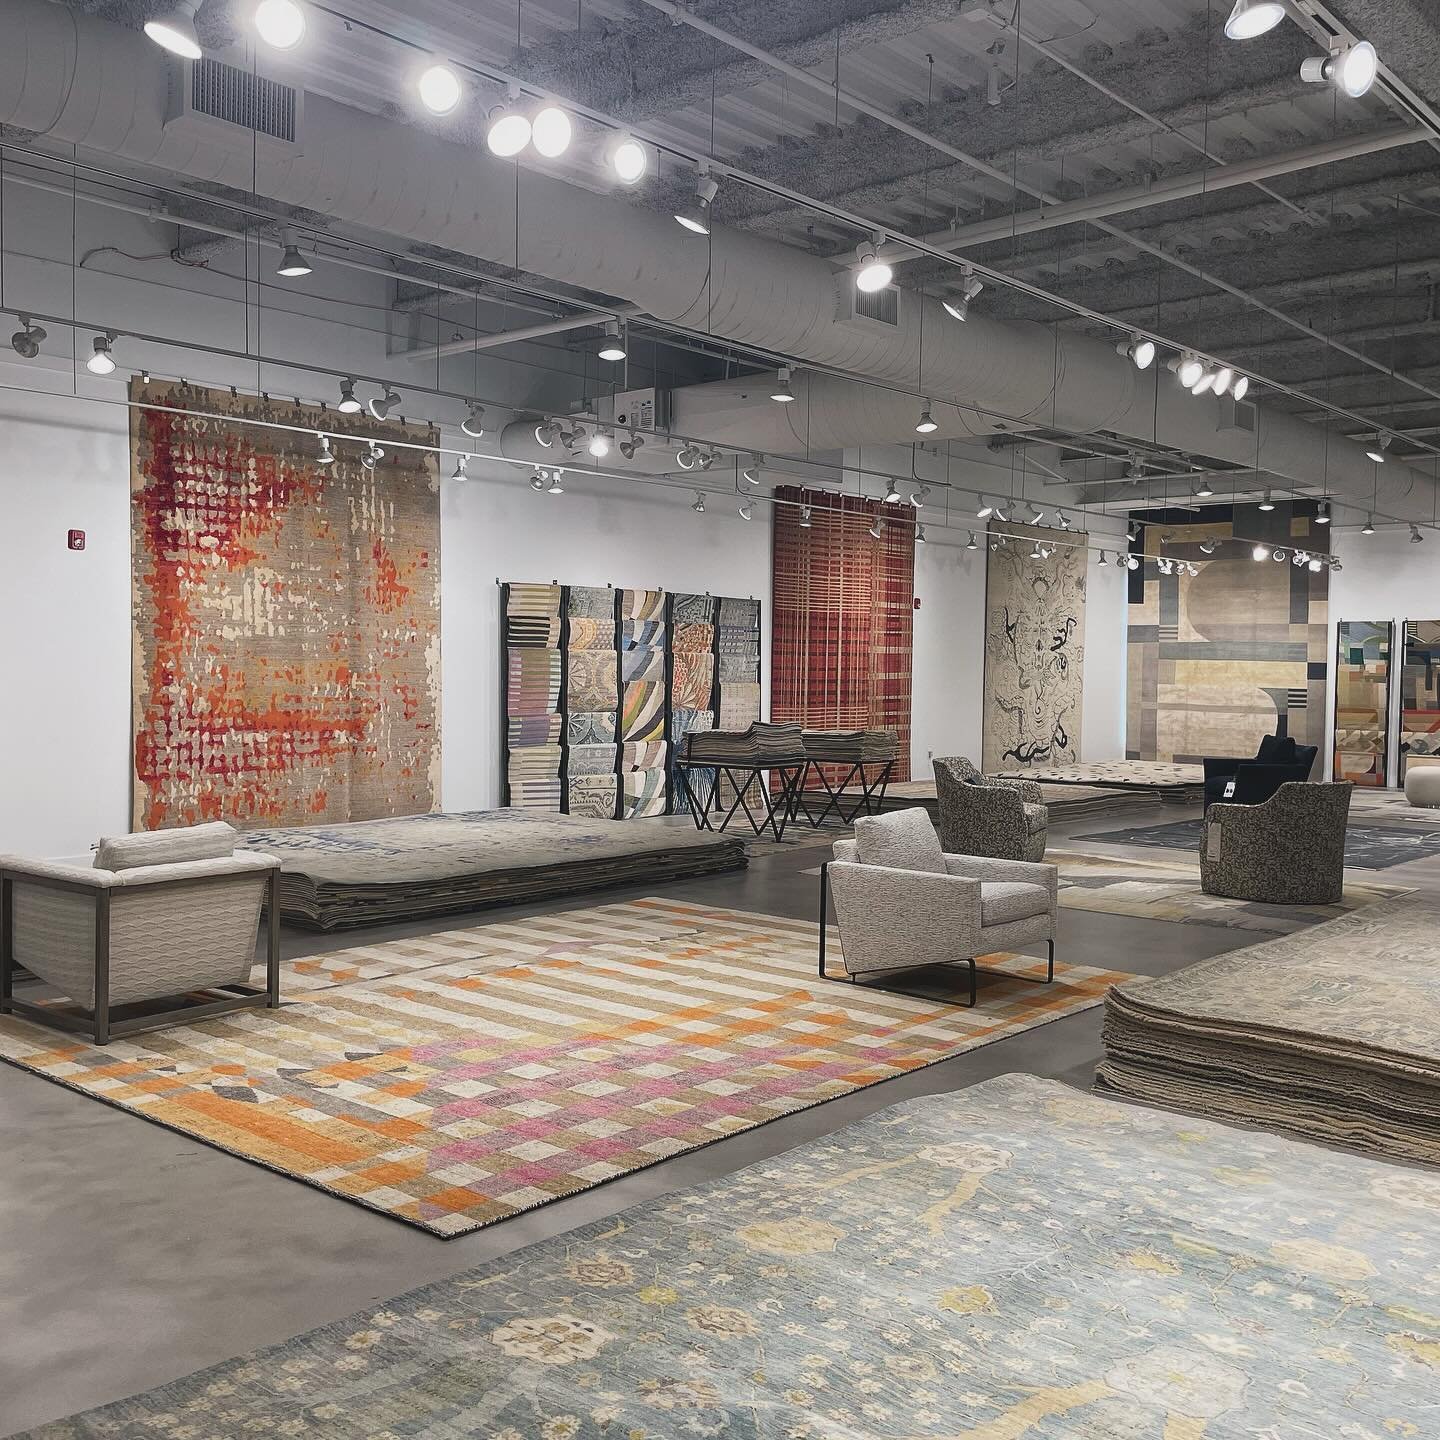 Day 2 at @hpmkt. Don&rsquo;t miss out on exclusive rugs ranging from our beloved collections like our Oushak, Khotan, Highland, and many more. Stop by today at 200 Steele building and let us help you find the perfect rug you&rsquo;ve been looking for